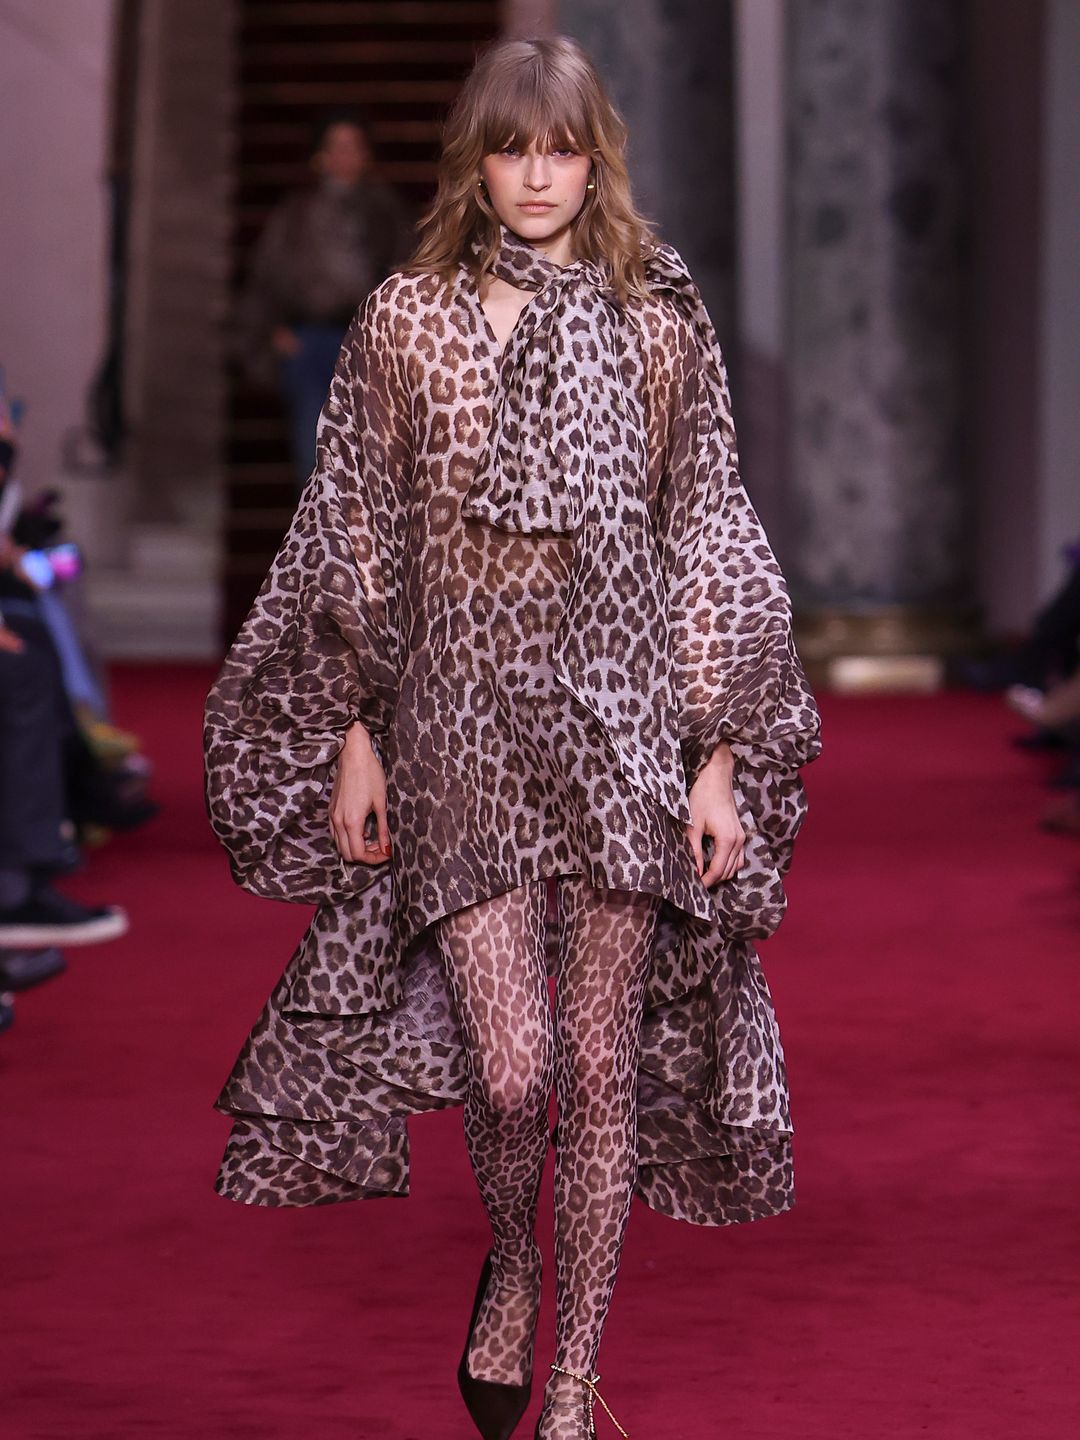 A model walks the runway during the Zimmermann Ready to Wear Fall/Winter 2024-2025 fashion show in a leopard print dress